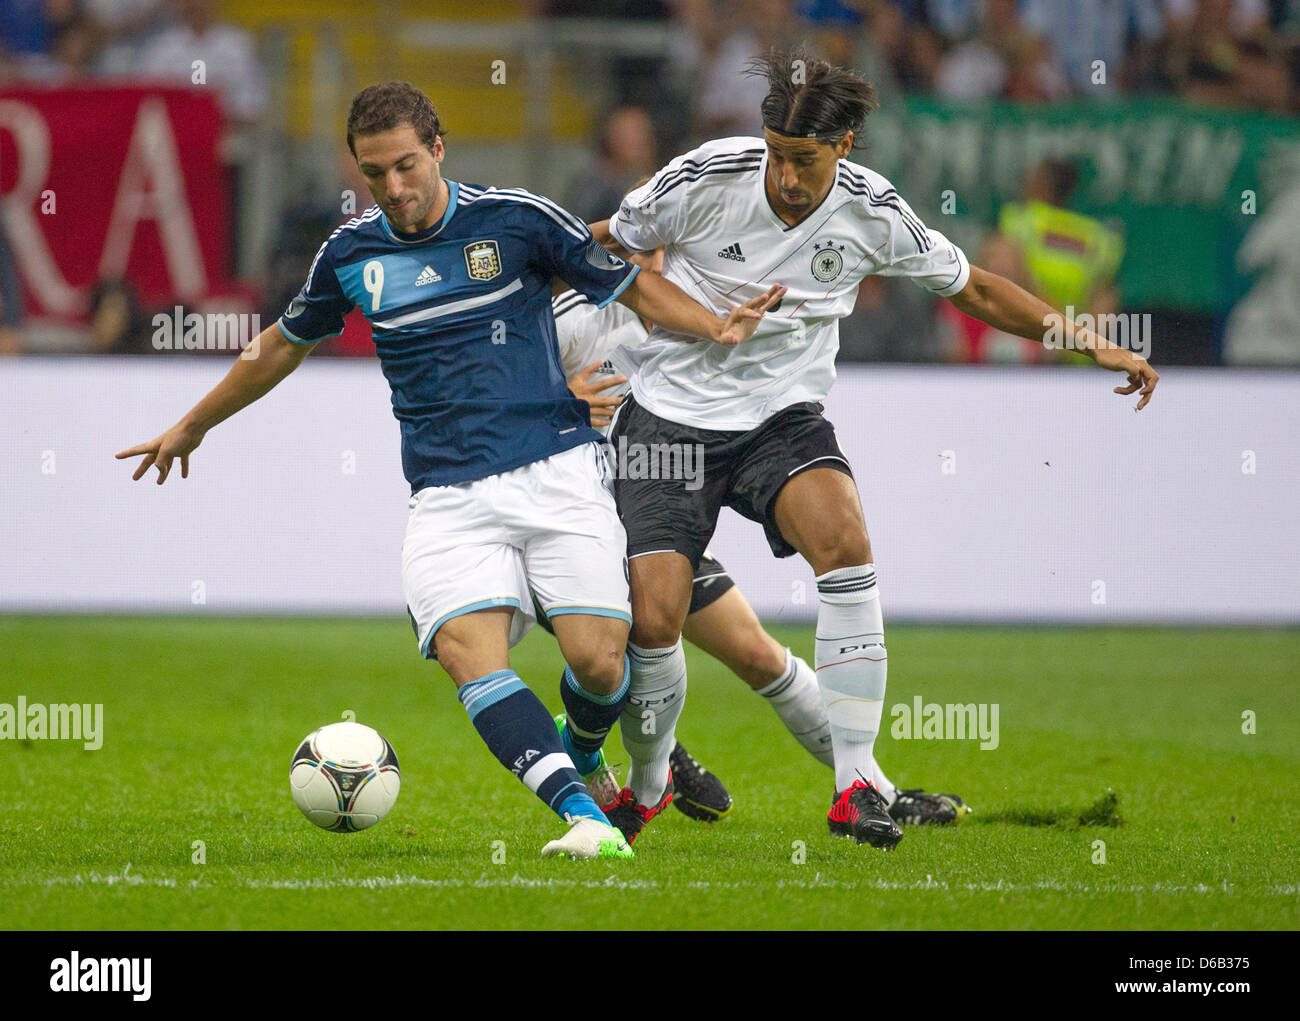 Germany's Sami Khedira (r) vies for the ball with Argentina's Gonzalo Higuain during their friendly soccer match Germany against Argentina at the Commerzbank-Arena in Frankfurt/ Main, Germany, 15 August 2012. Photo: Uwe Anspach dpa/lhe Stock Photo